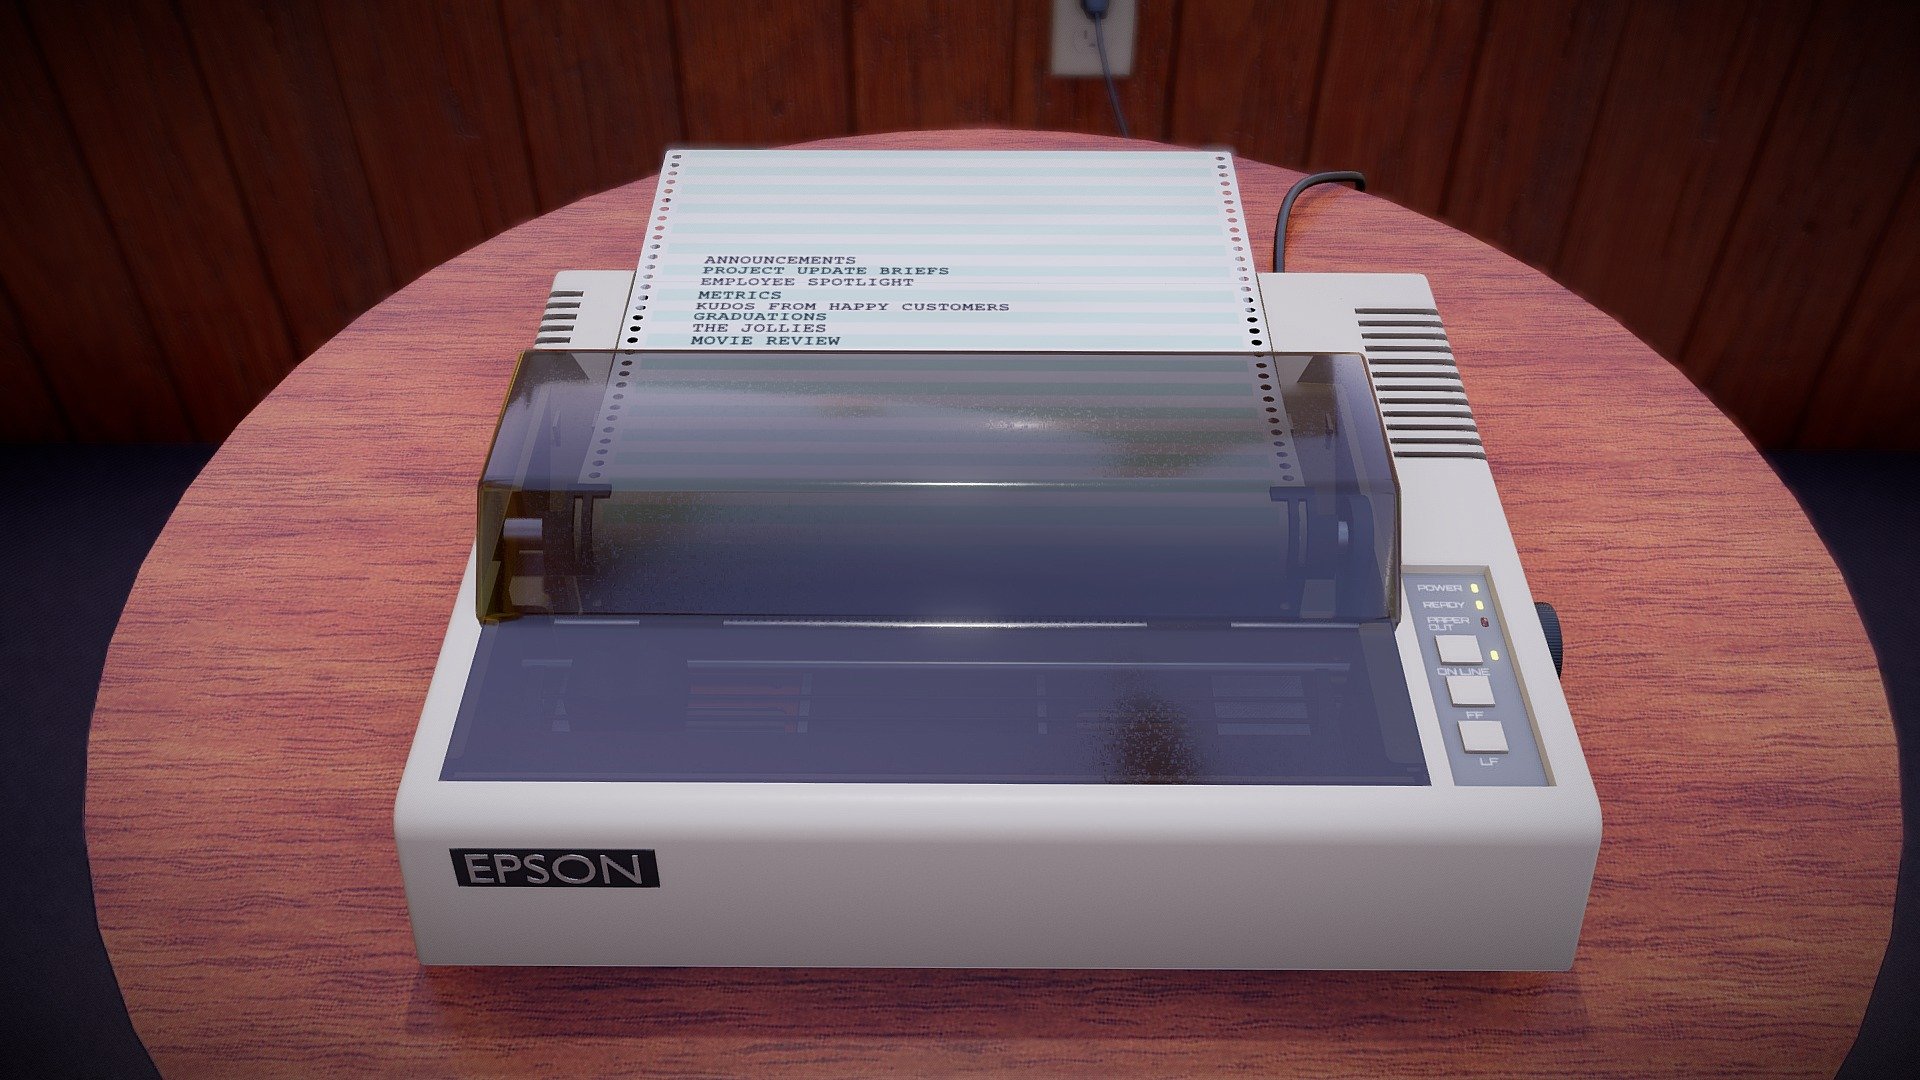 An Epson MX-80 Dot Matrix Printer, used in a render for my workplace's departmental newsletter. Good references were hard to come by for the interior, so I had to take some liberties.

Modeled in Blender and textured in Substance Painter 3d model